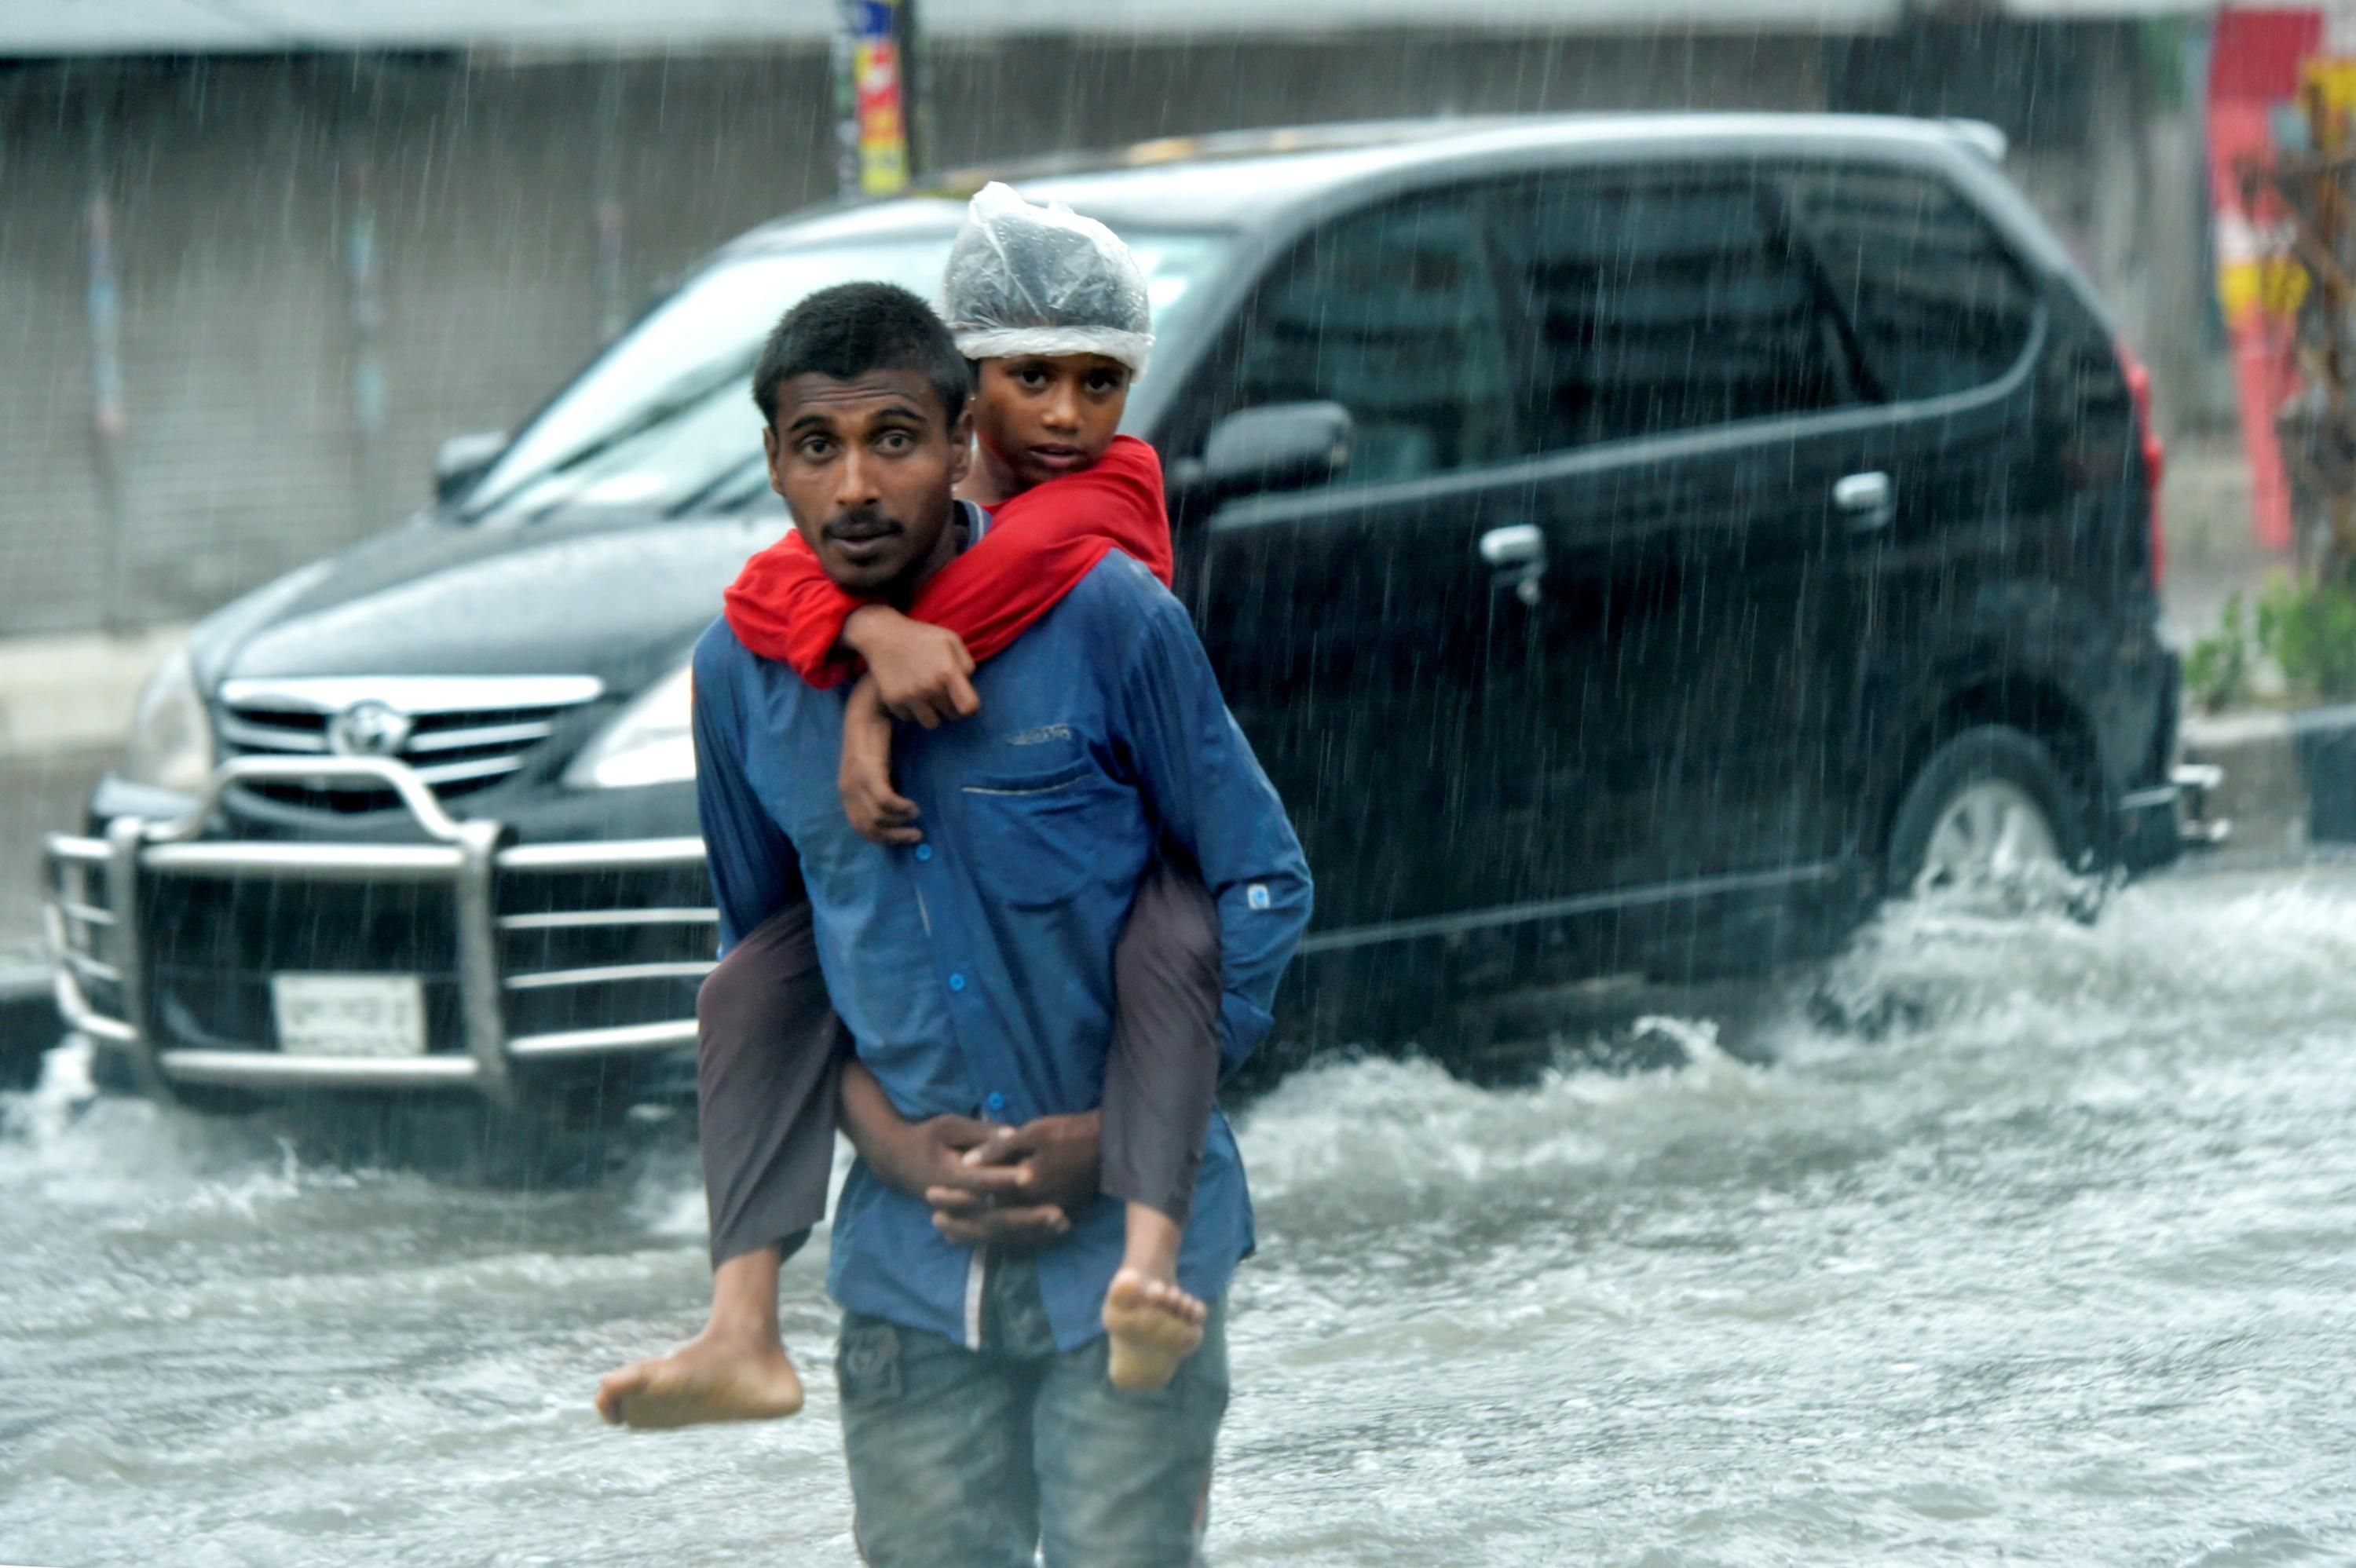 A man and his child attempt to flee a flooding street in Bangladesh